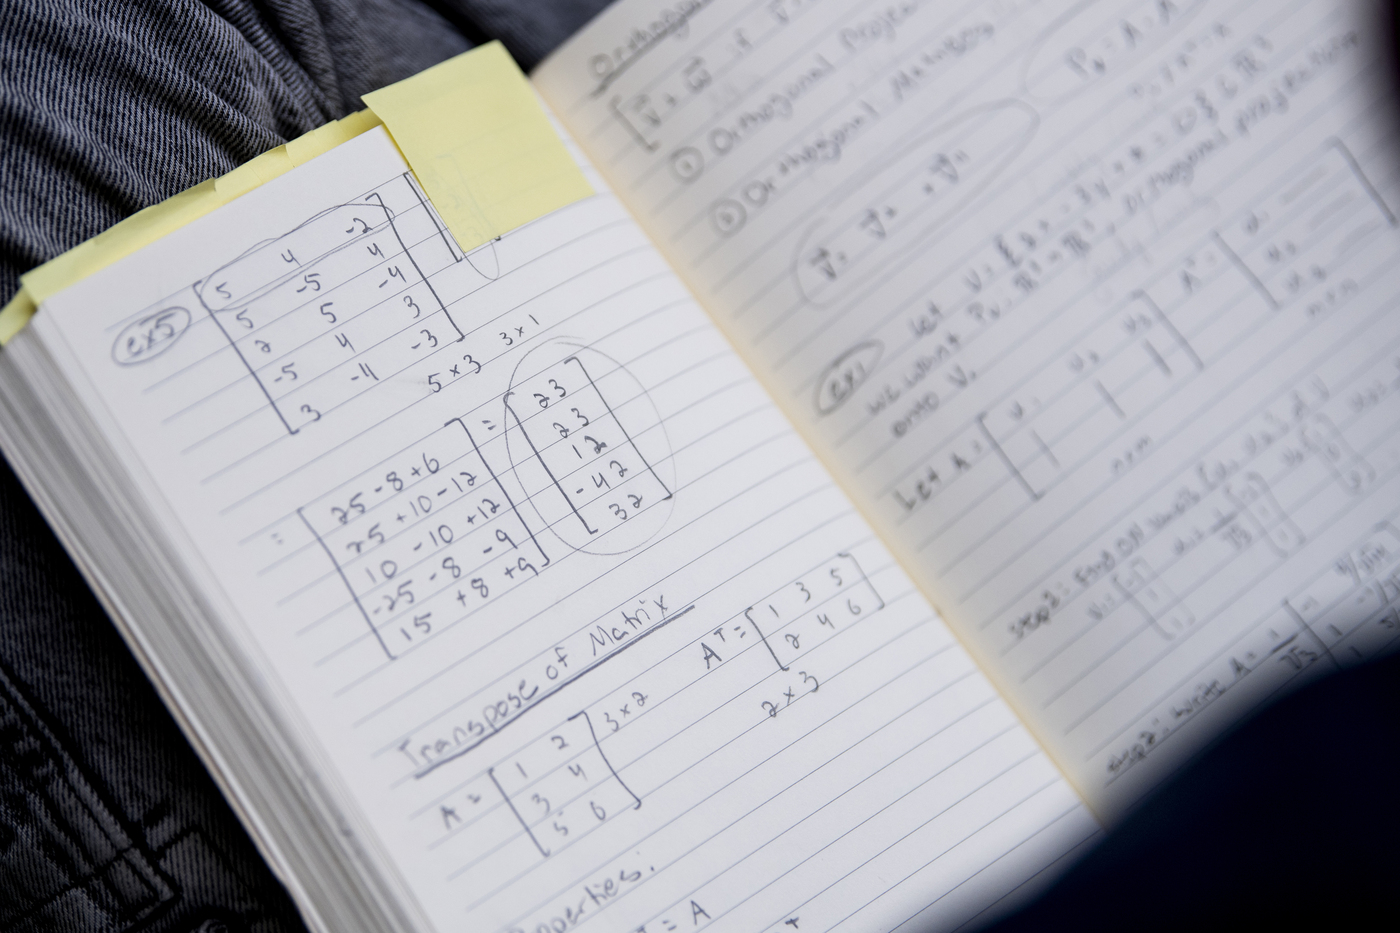 math problems written on a piece of paper within a notebook